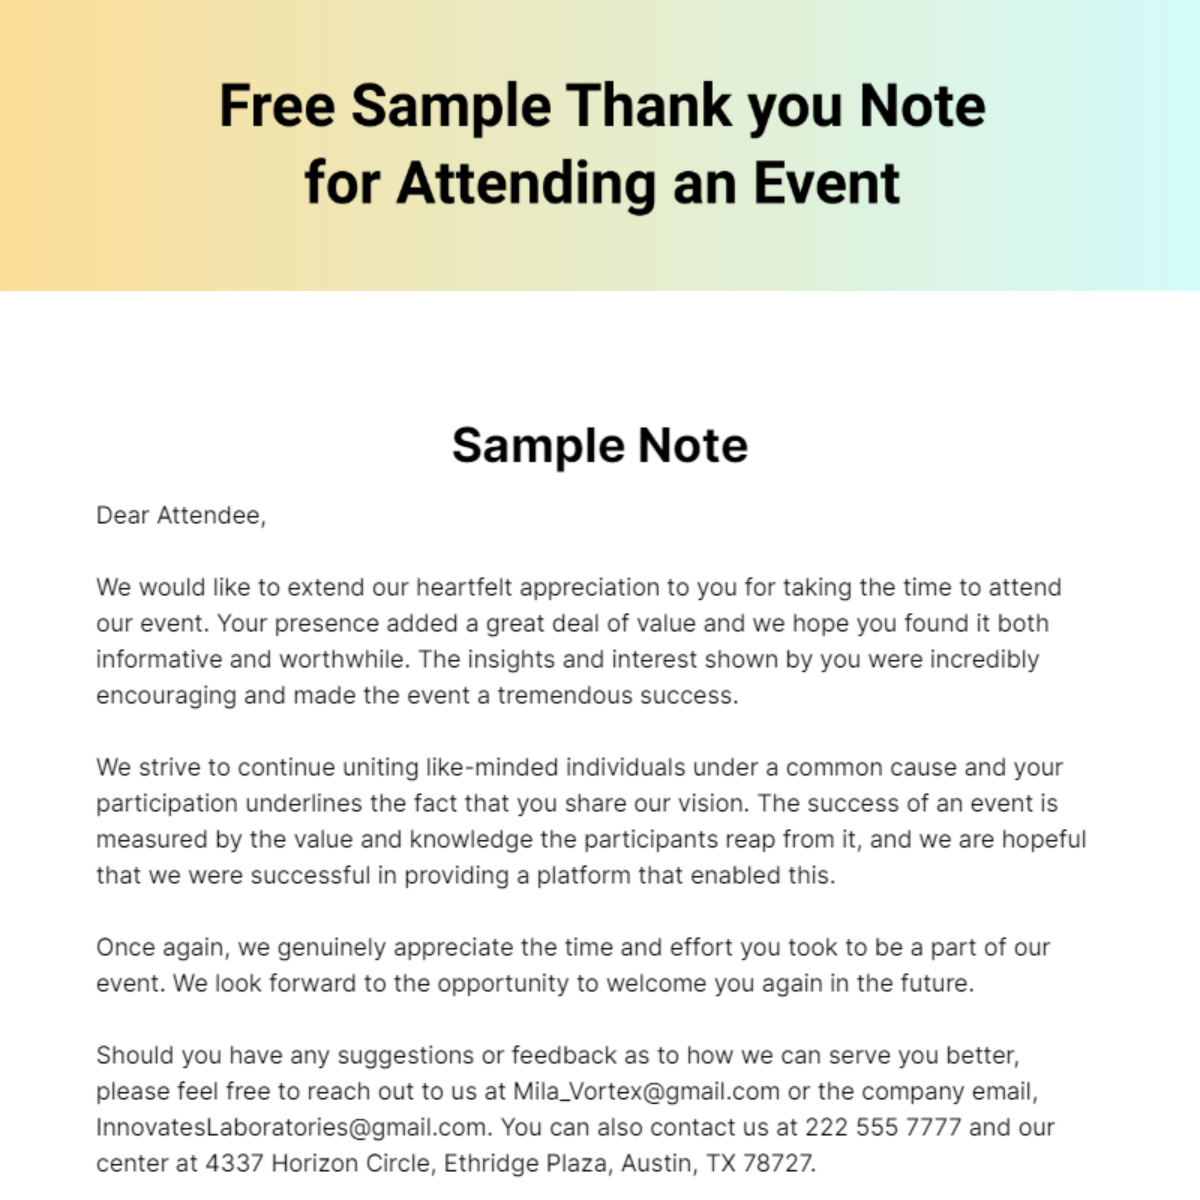 Sample Thank you Note for Attending an Event Template